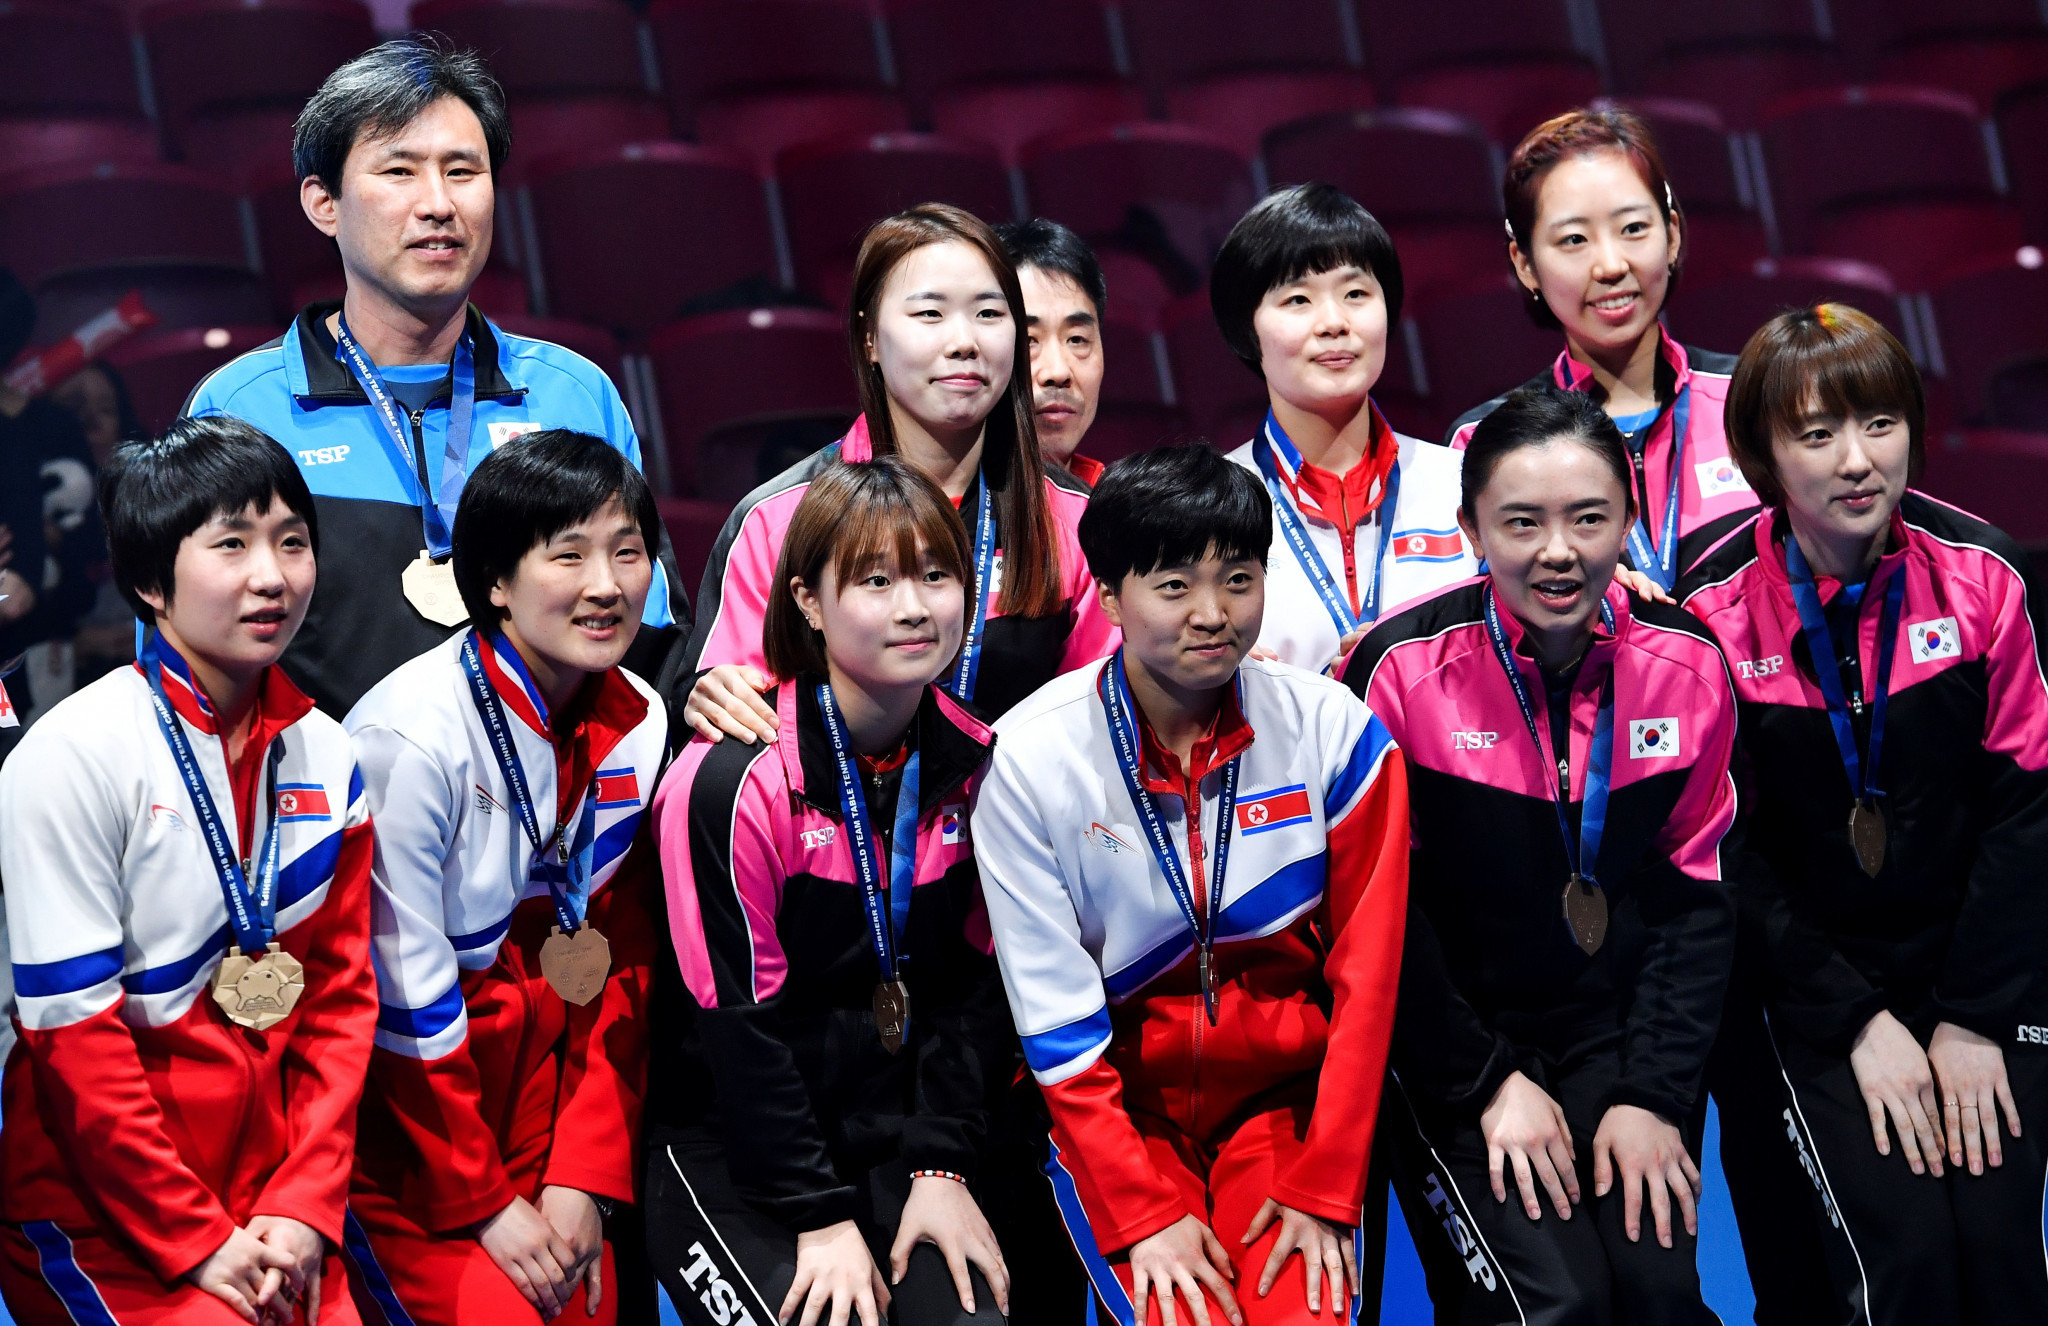 North and South Korea competed together at the recent World Team Table Tennis Championships in Halmstad in Sweden ©Getty Images